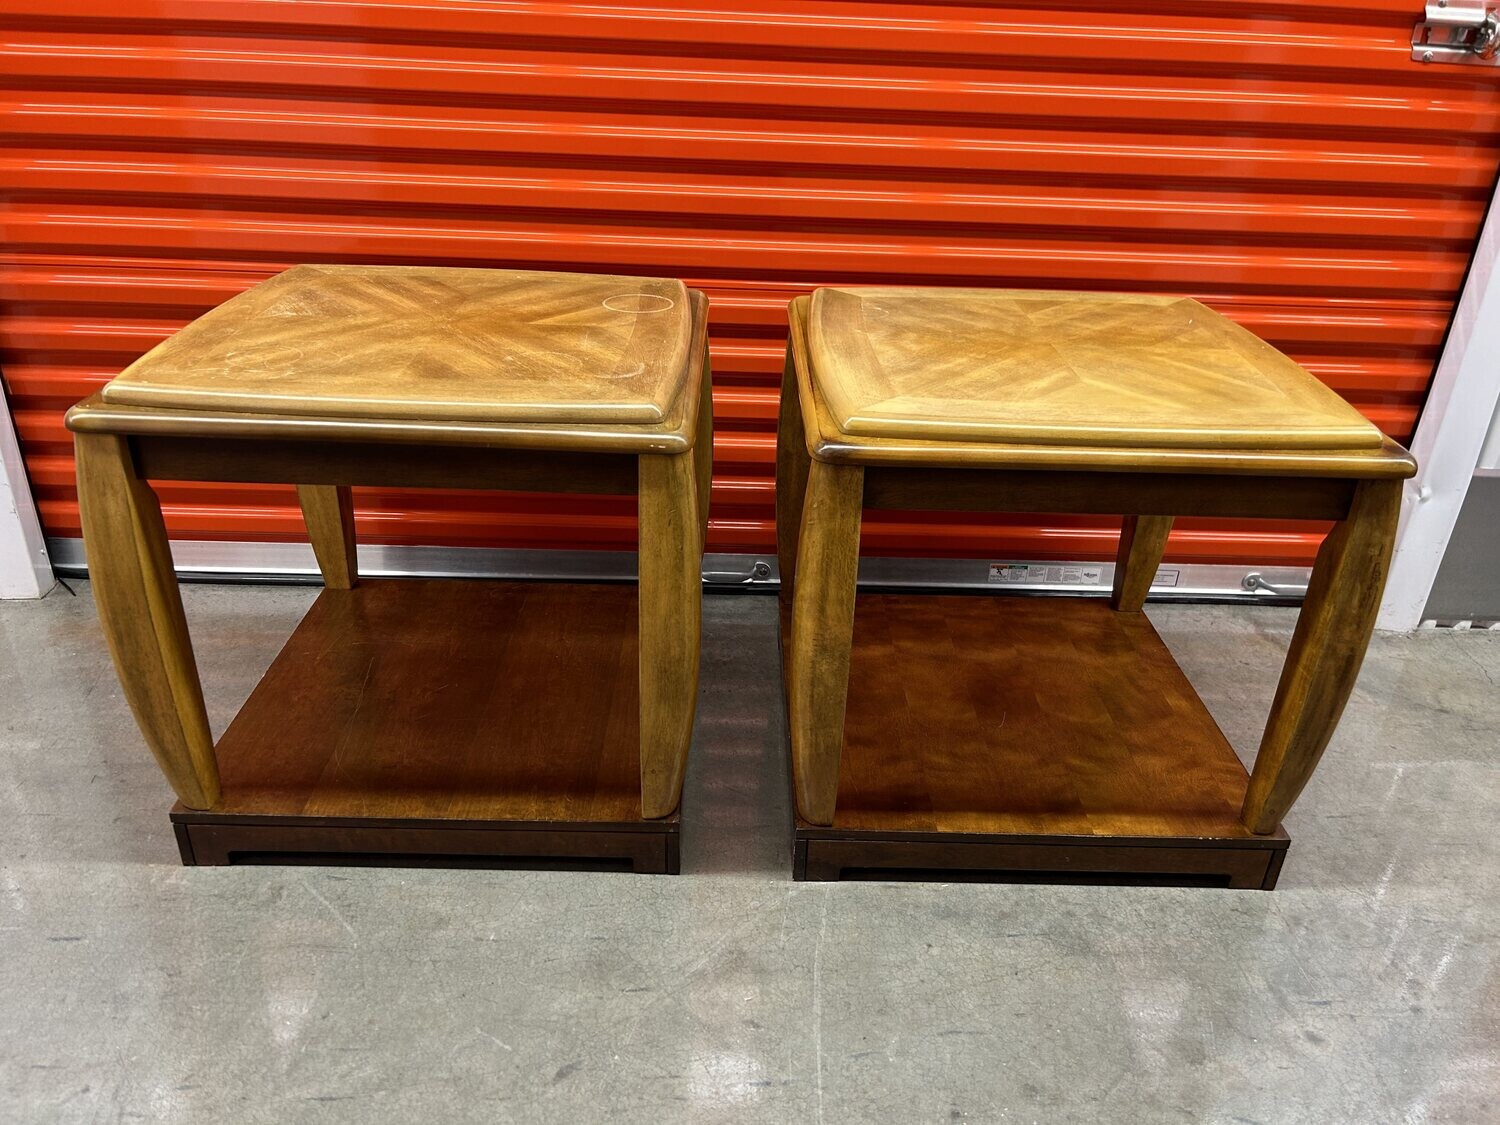 Matching End Tables, 26" square #2123 ** 1 wk. to sell, full price